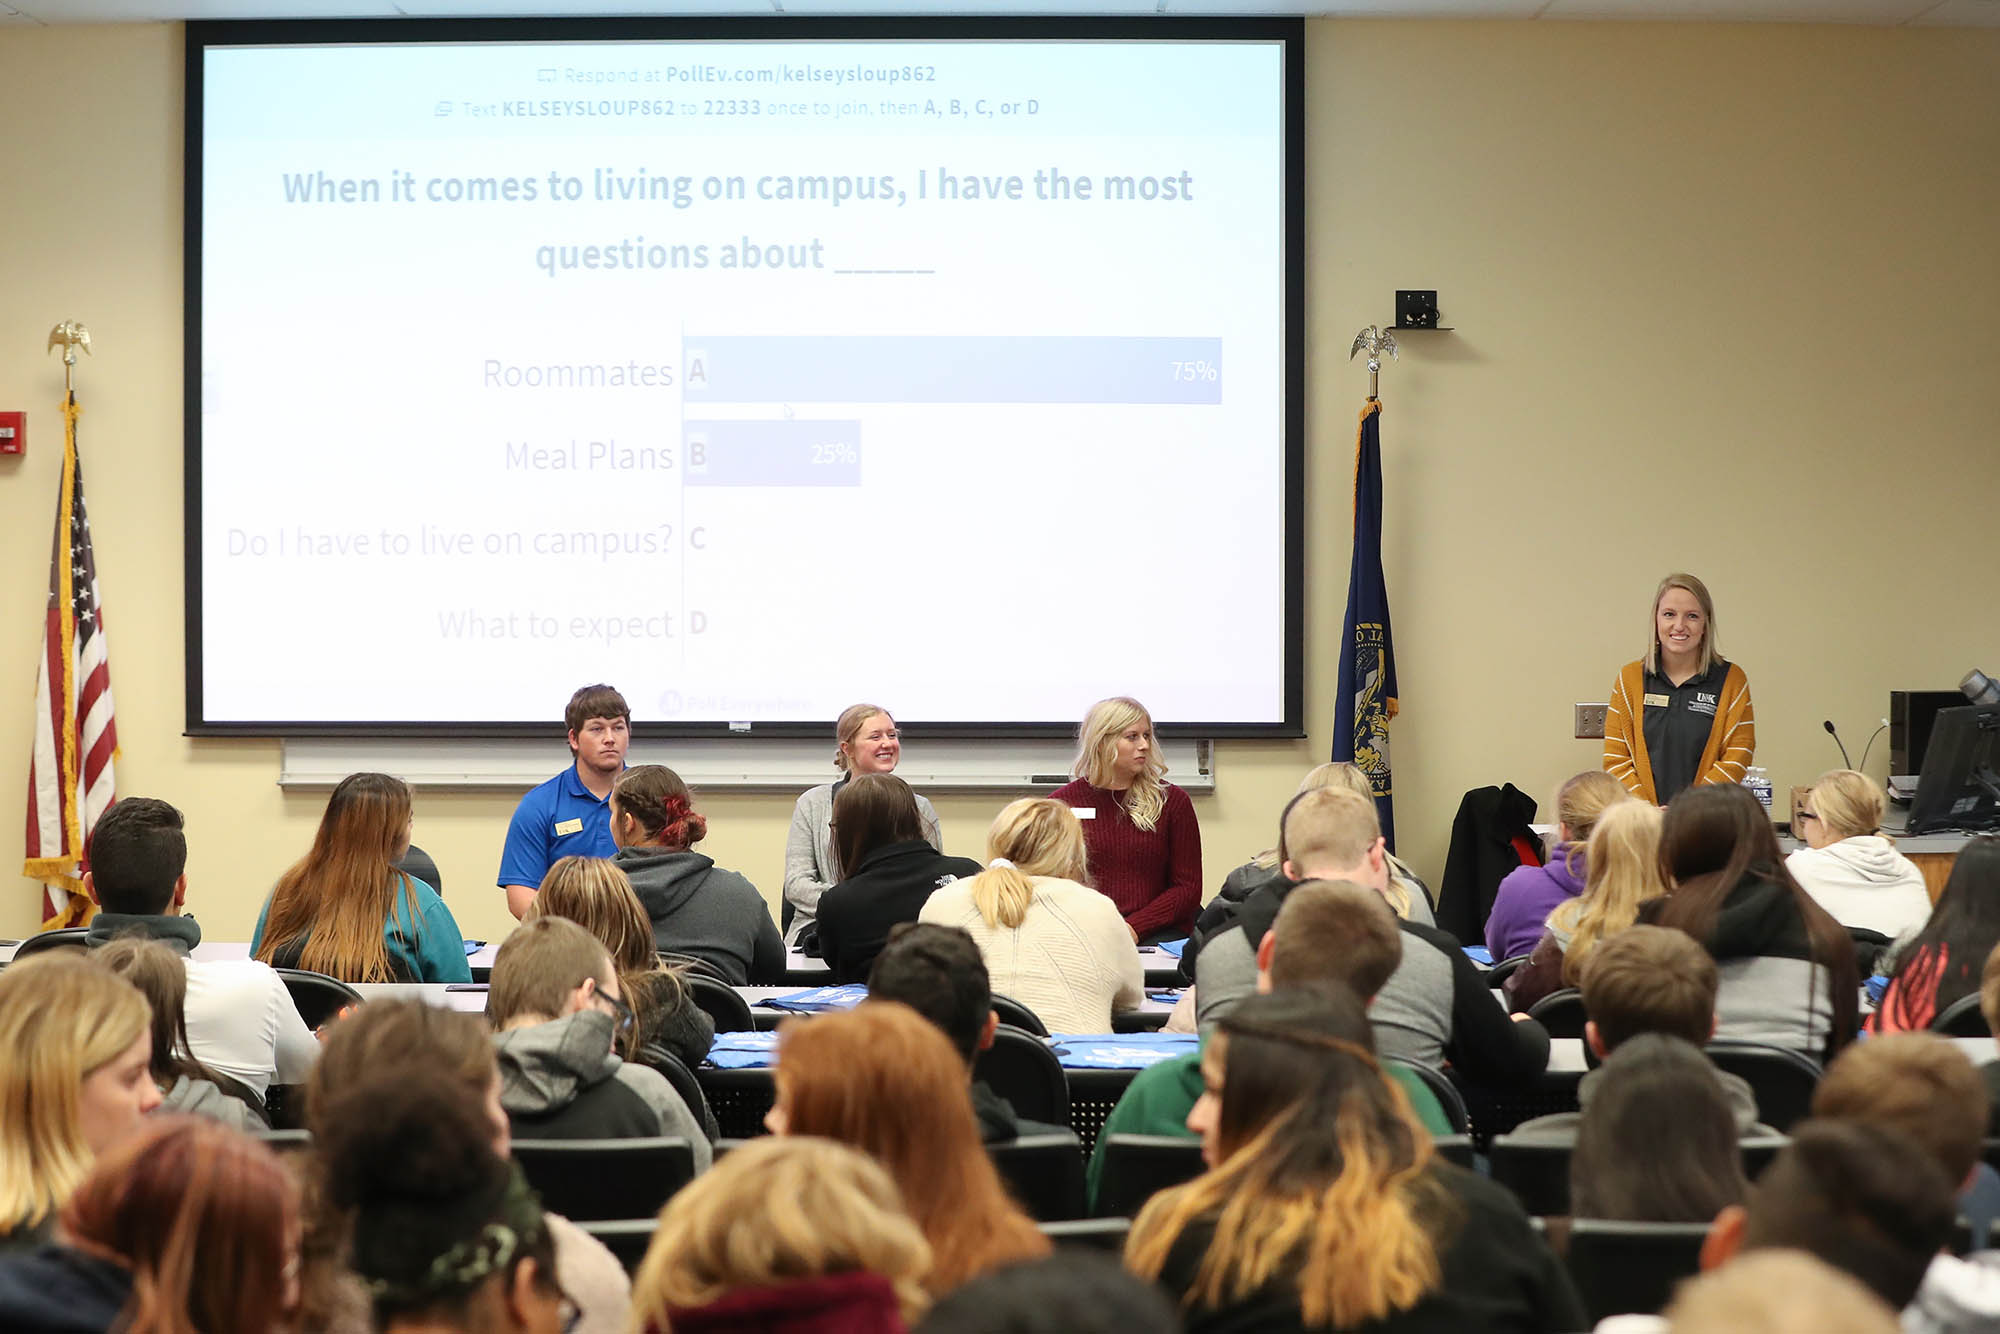 About 125 students from Grand Island Senior High School visited UNK on Wednesday to learn about local career opportunities and how UNK can help them reach their goals. The event, hosted by UNK’s College of Business and Technology, included business and student panels and a campus tour. (Photos by Corbey R. Dorsey, UNK Communications)